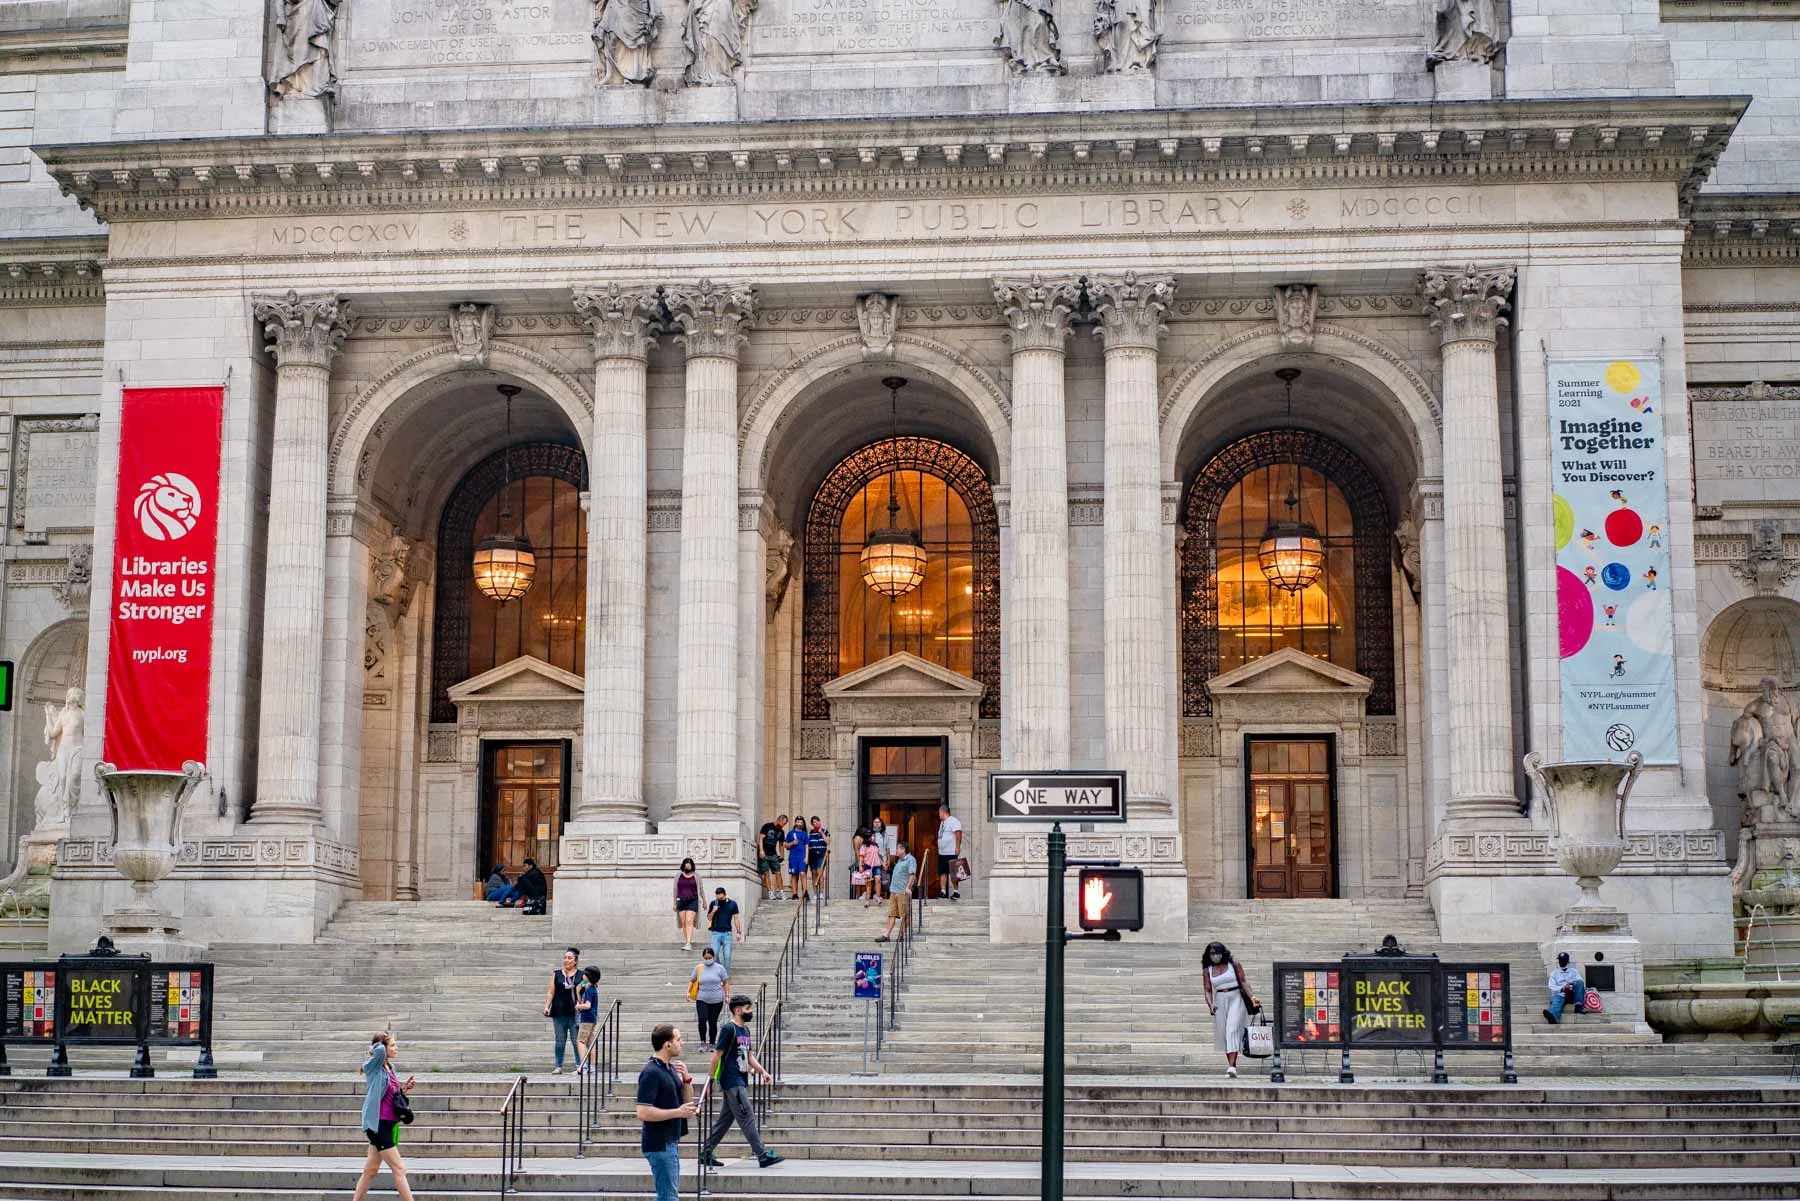 New York Public Library, 3 days NYC